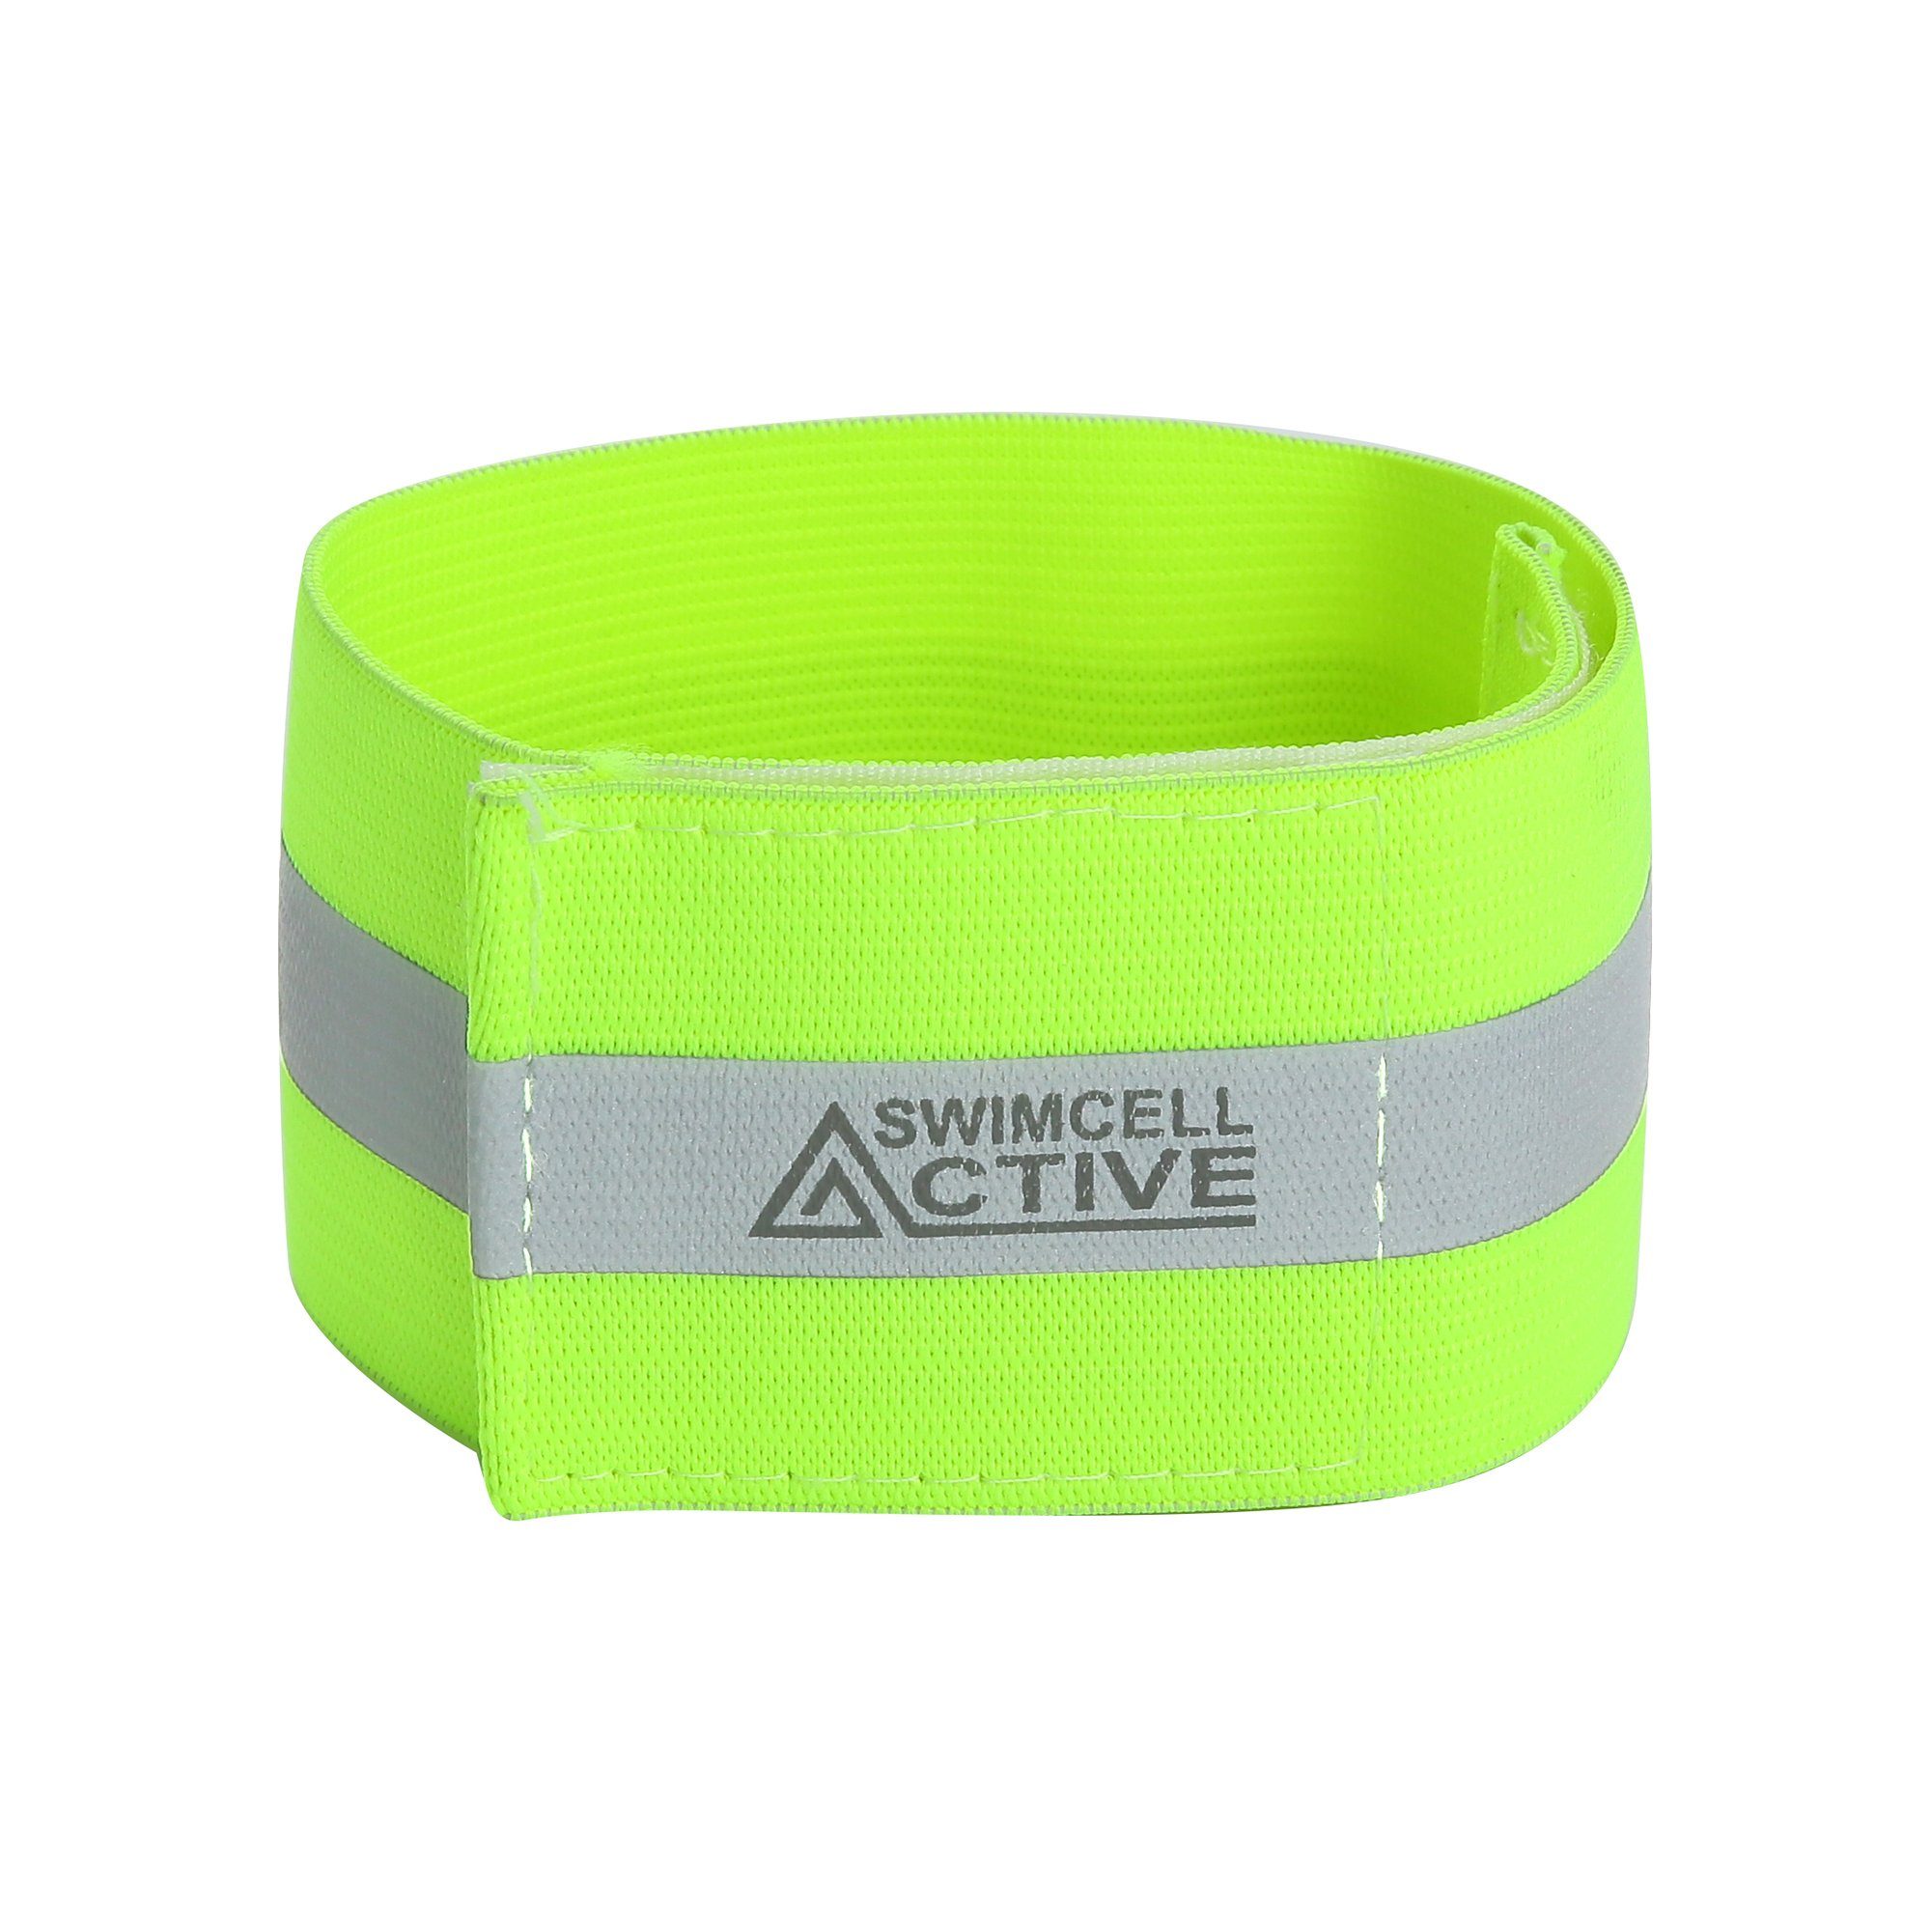 Reflective bands for cycling